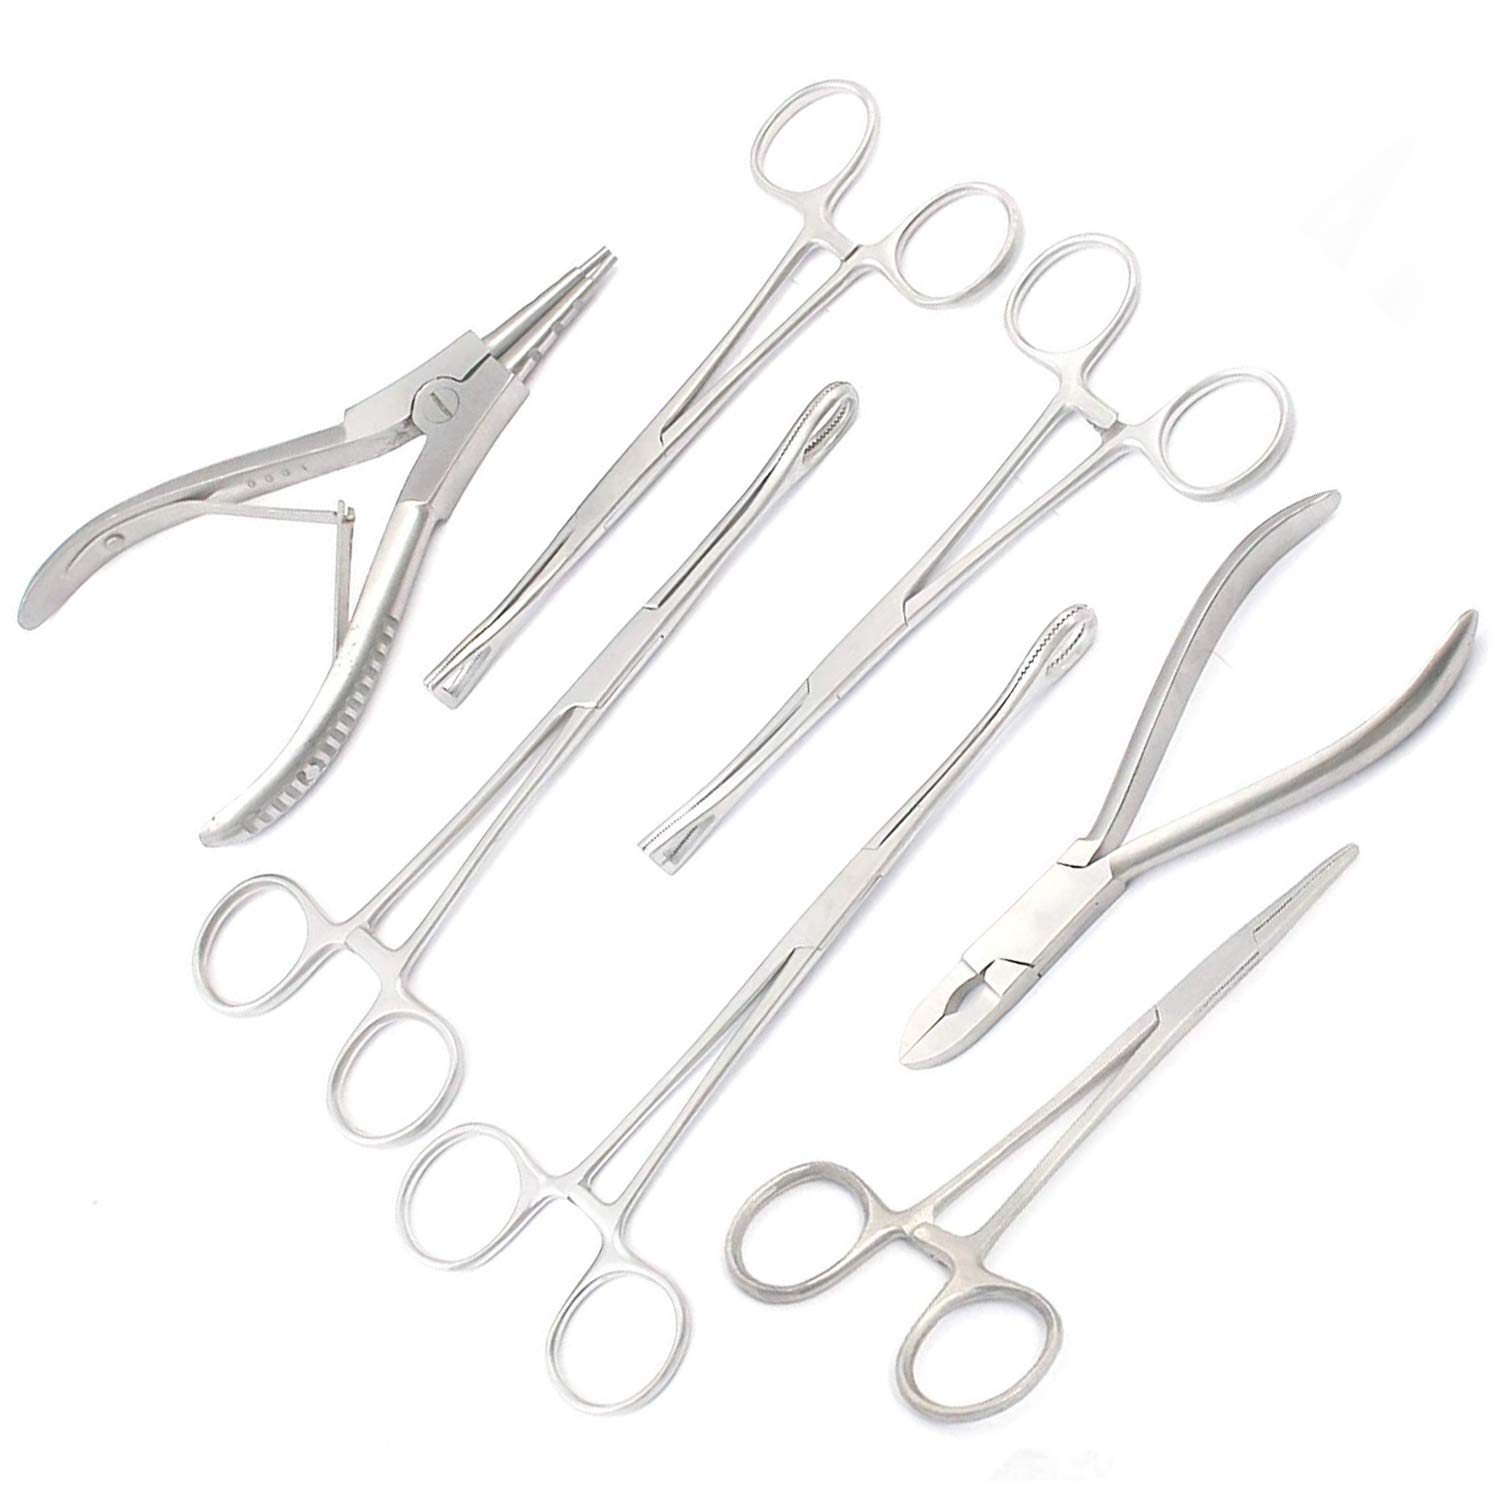 7 BODY PIERCING INSTRUMENTS KIT TOOLS PENNINGTON FORCEPS 'R' by G.S ONLINE STORE